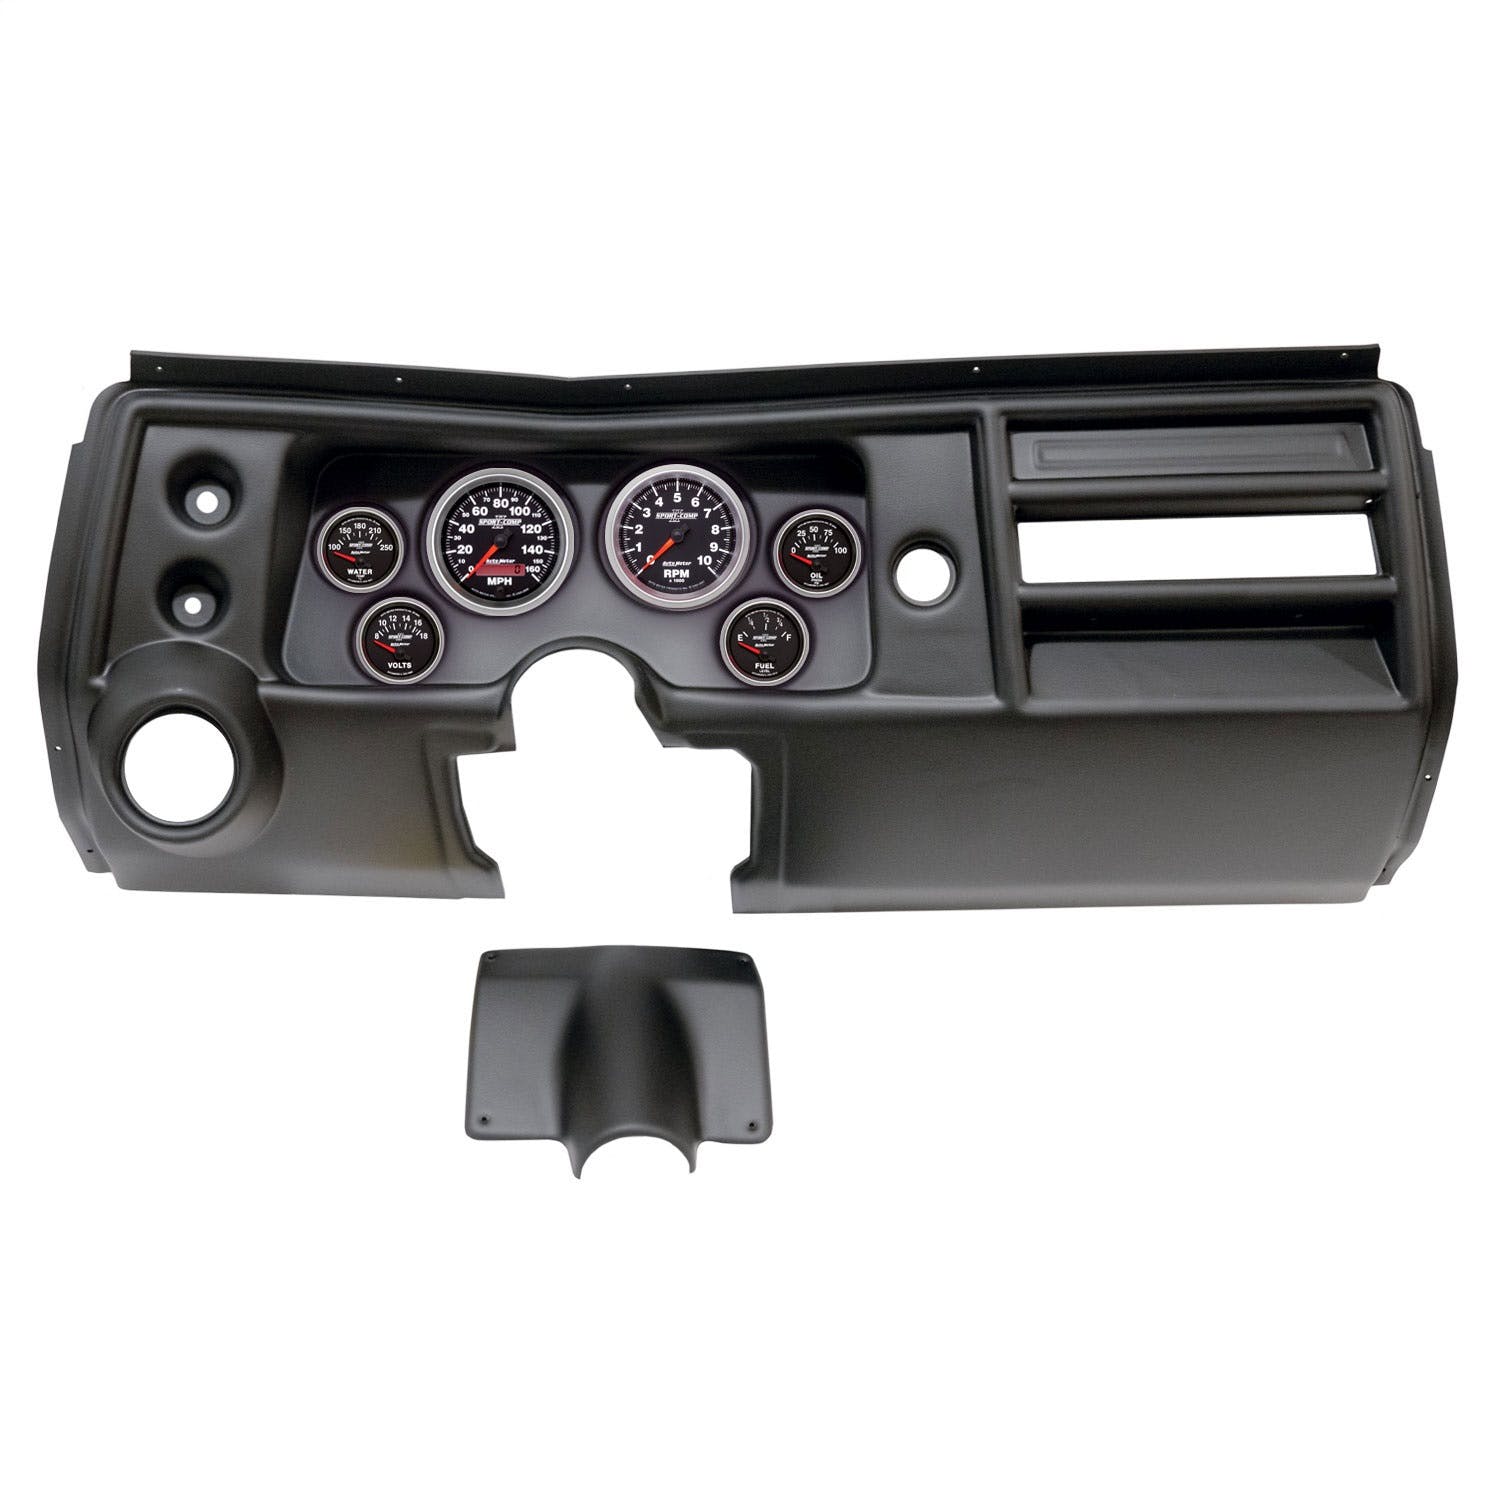 AutoMeter Products 2902-12 6 Gauge Direct-Fit Dash Kit, Chevy Chevelle Vent 68, Sport-Comp II